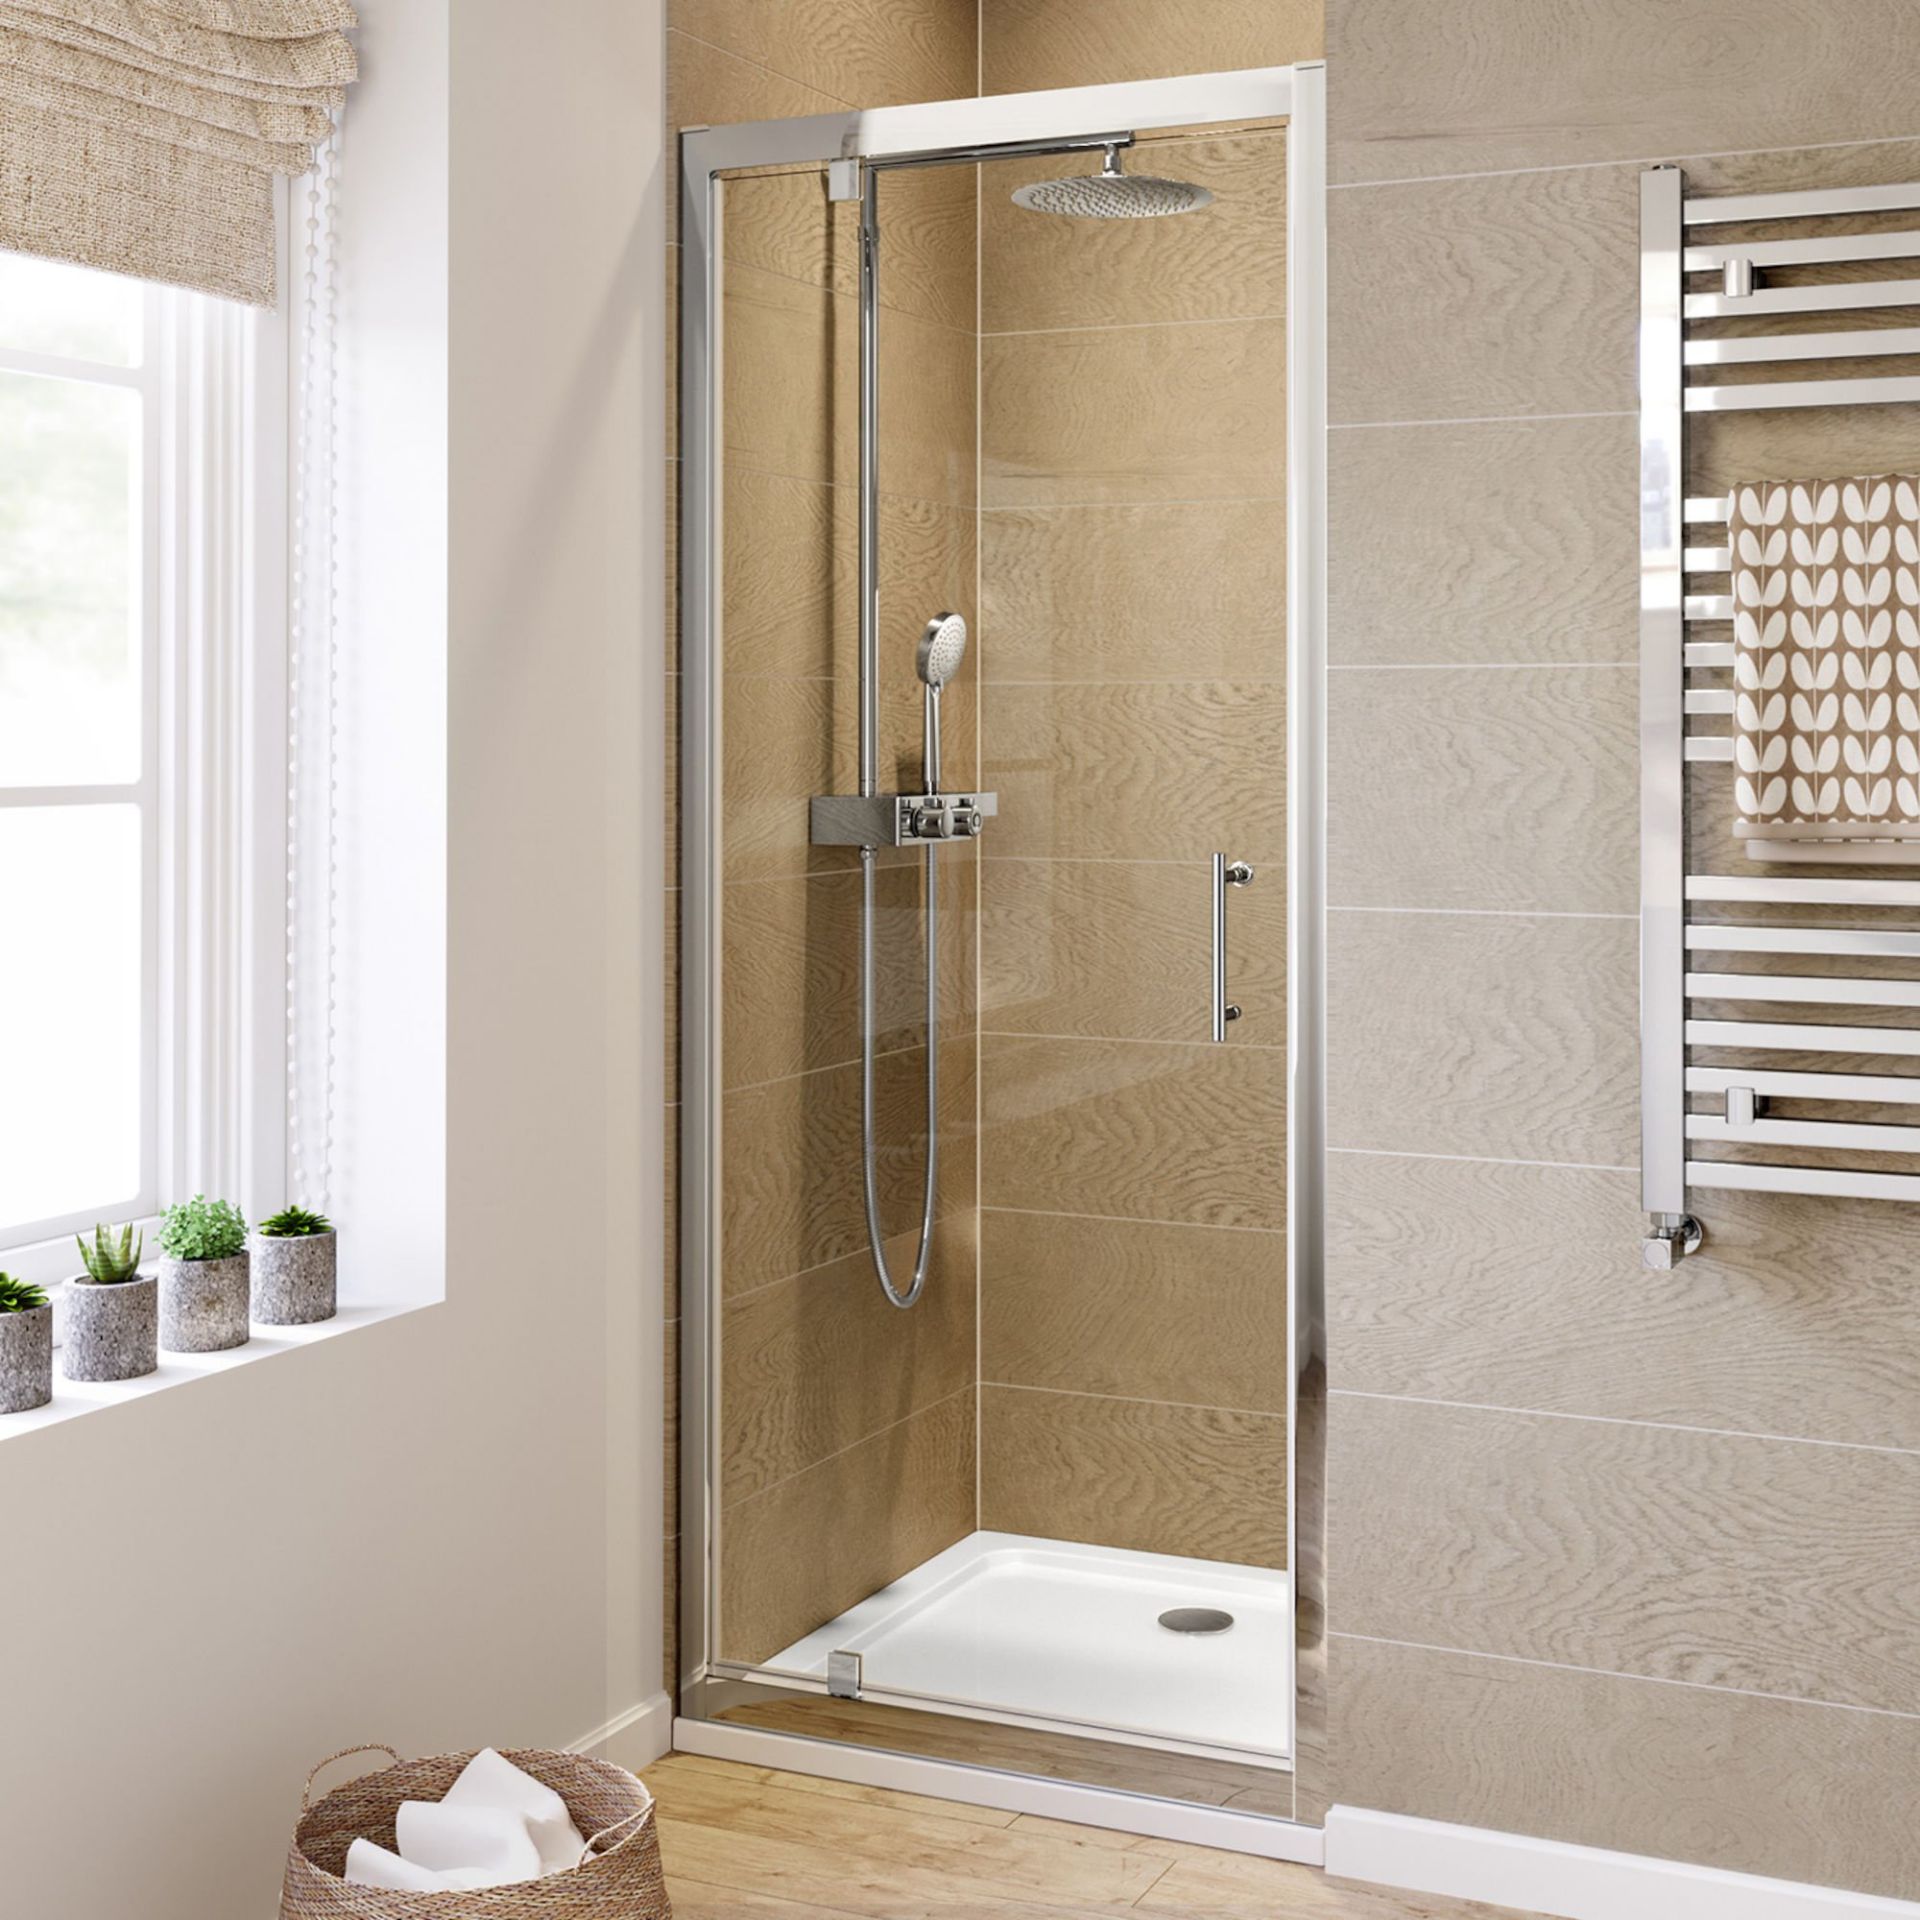 (L54) 900mm - 6mm - Elements Pivot Shower Door RRP £299.99 6mm Safety Glass Fully waterproof